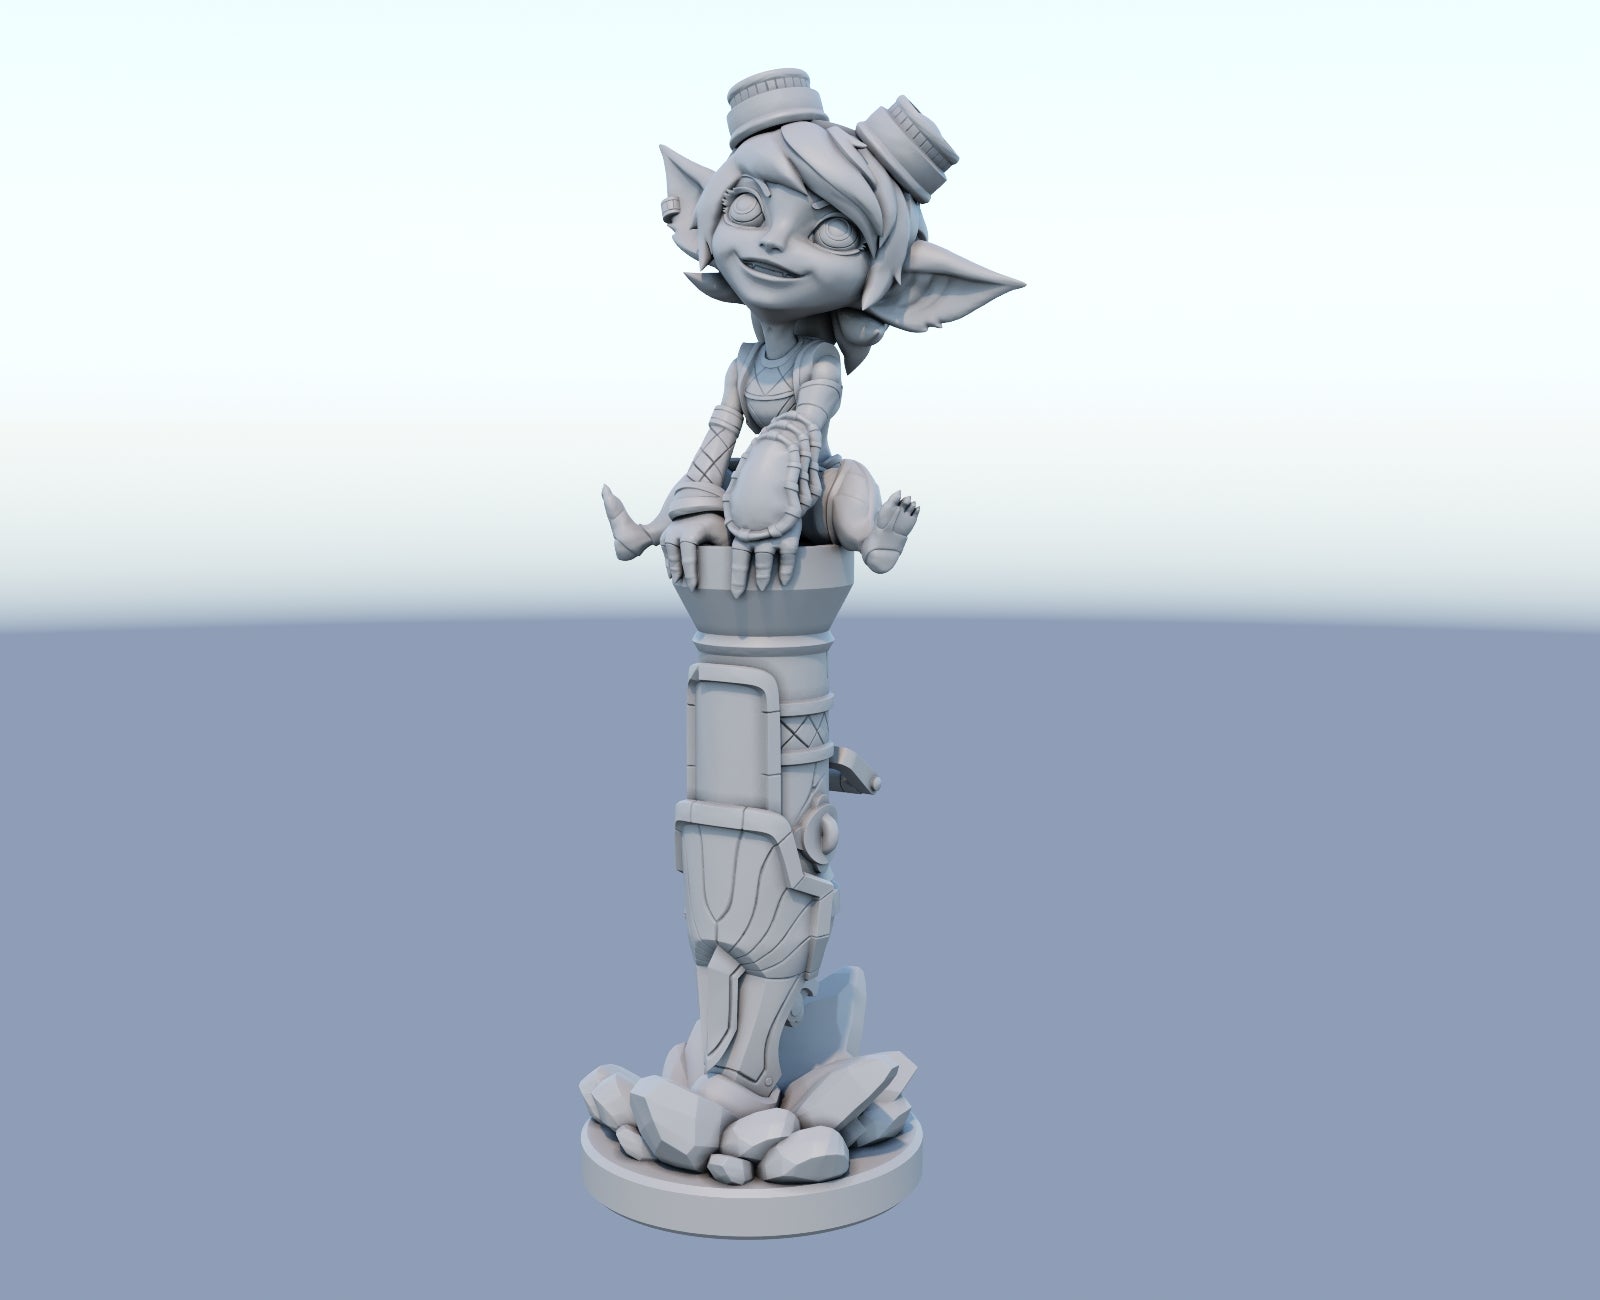 Tristana 3D-printed League of Legends champion figure. Decorate your gaming setup or home with your favorite League of Legends champion! Choose between the unpainted version, perfect for you to paint yourself, or the hand-painted version by a professional painter. Order your figure today!